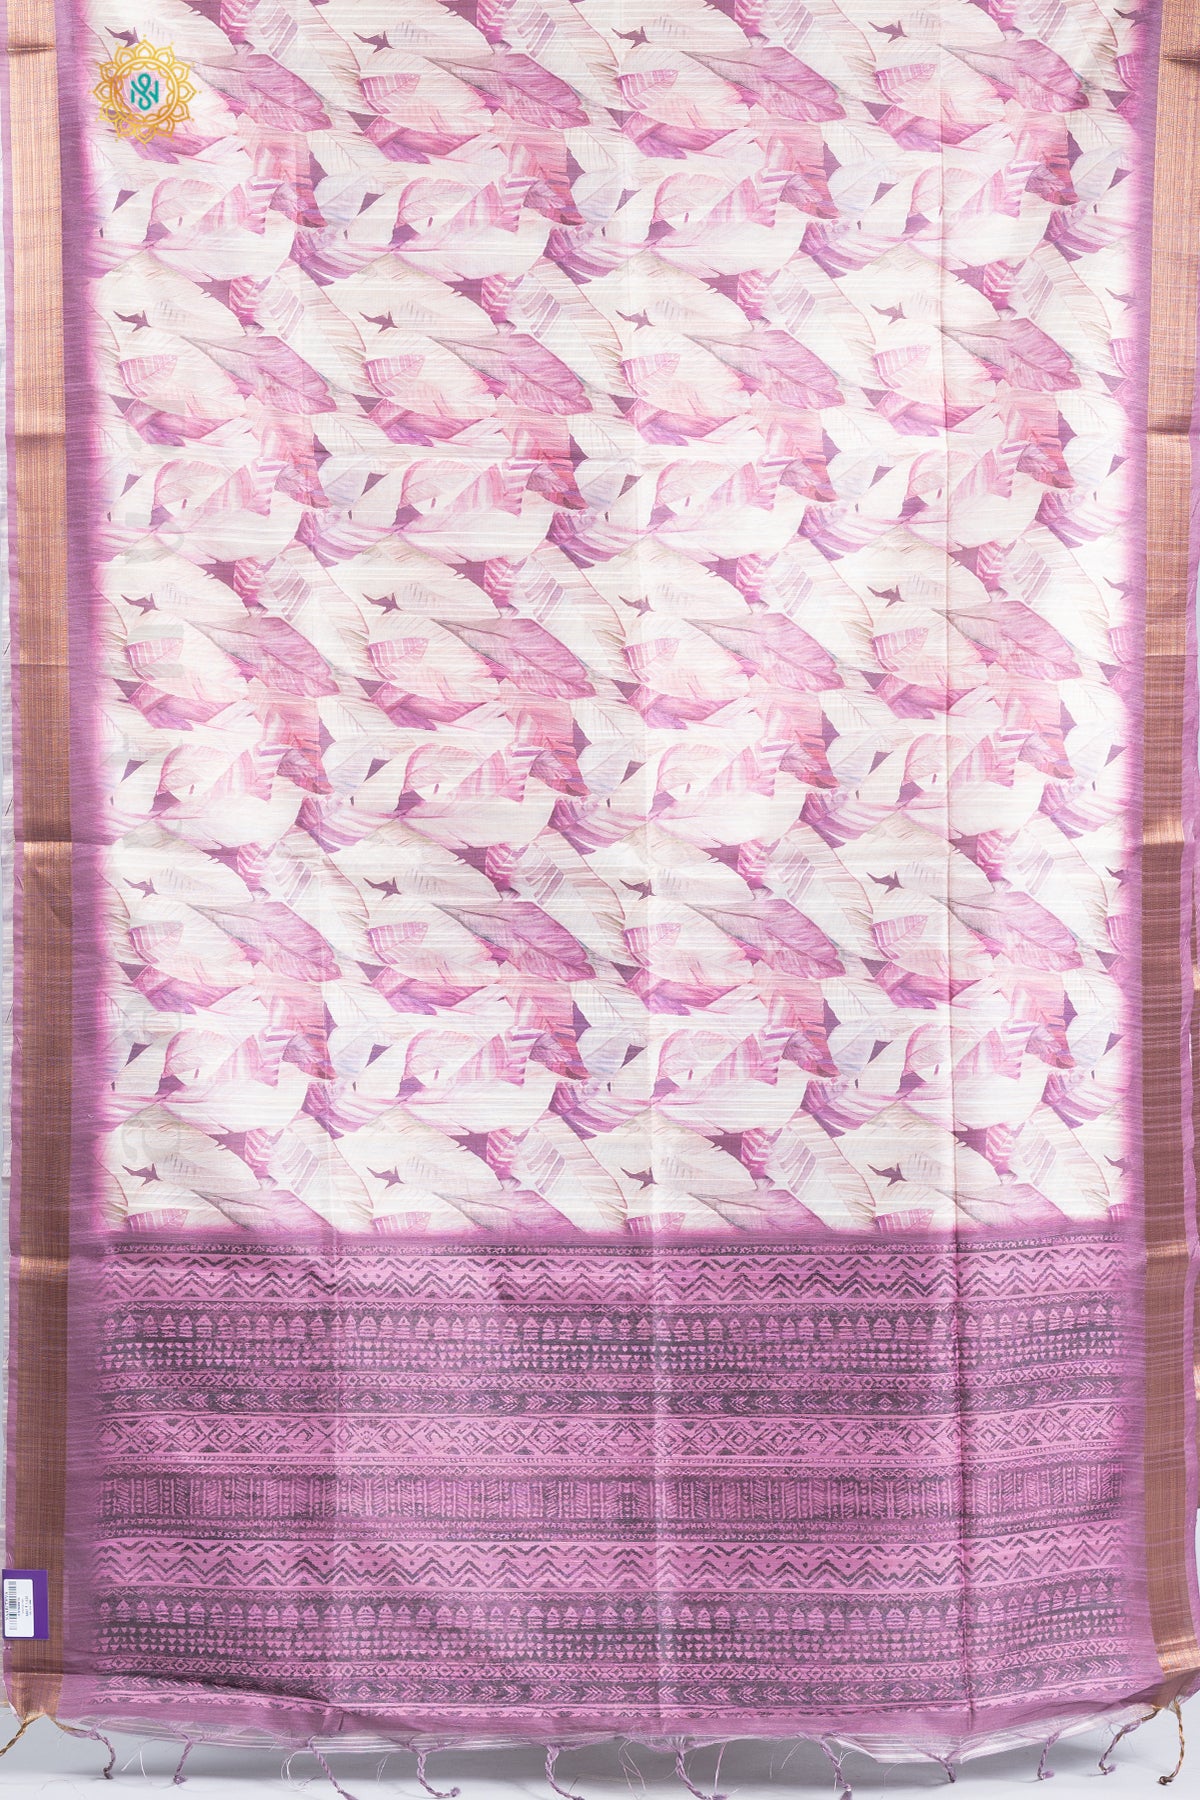 OFF WHITE WITH LAVENDER - KOTHA LINEN WITH DIGITAL PRINTS ON THE BODY & TISSUE BORDER